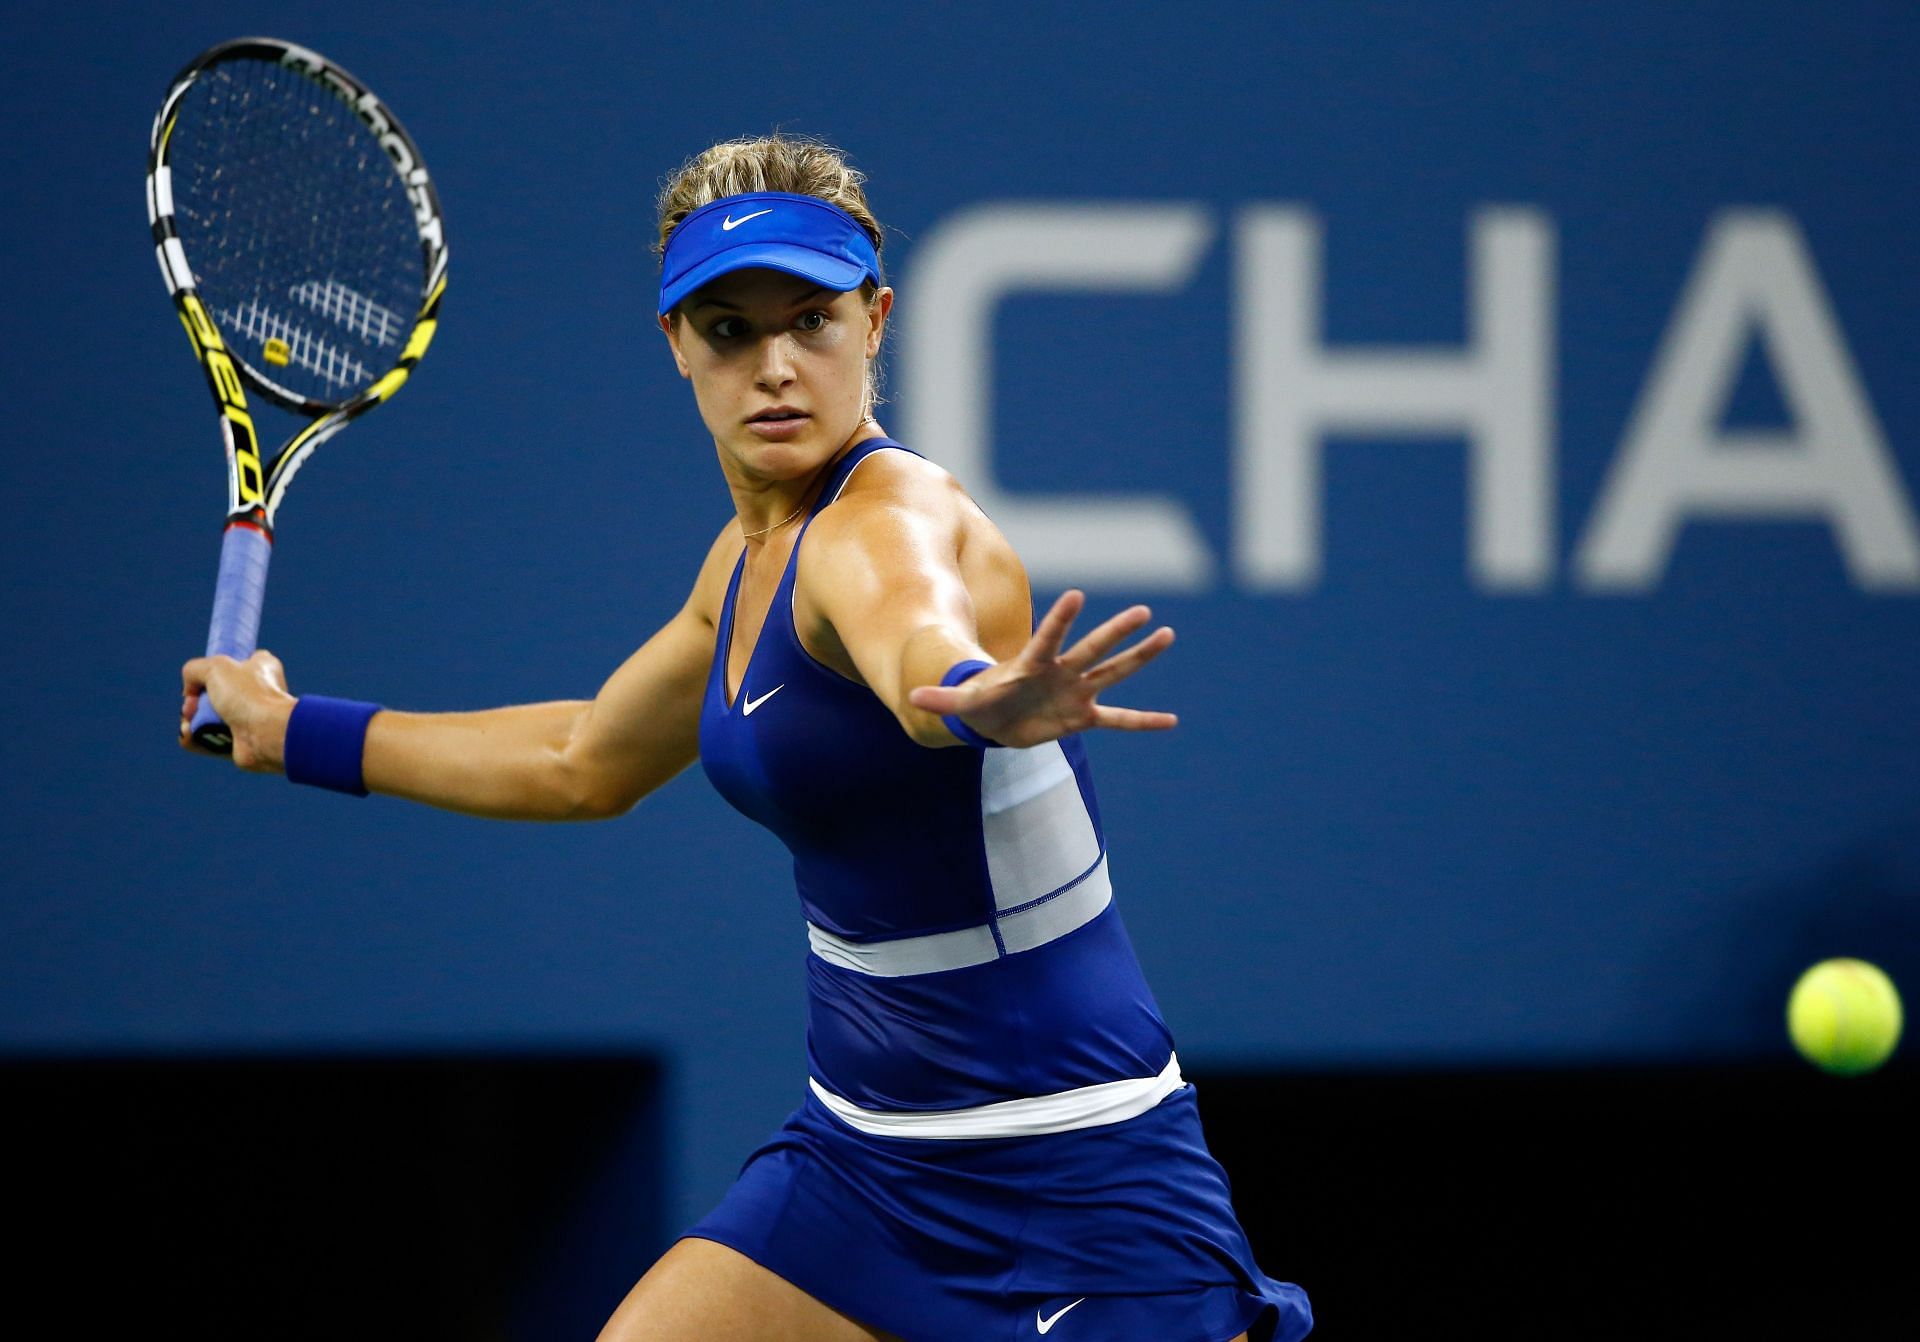 Eugenie Bouchard in action at the 2014 US Open